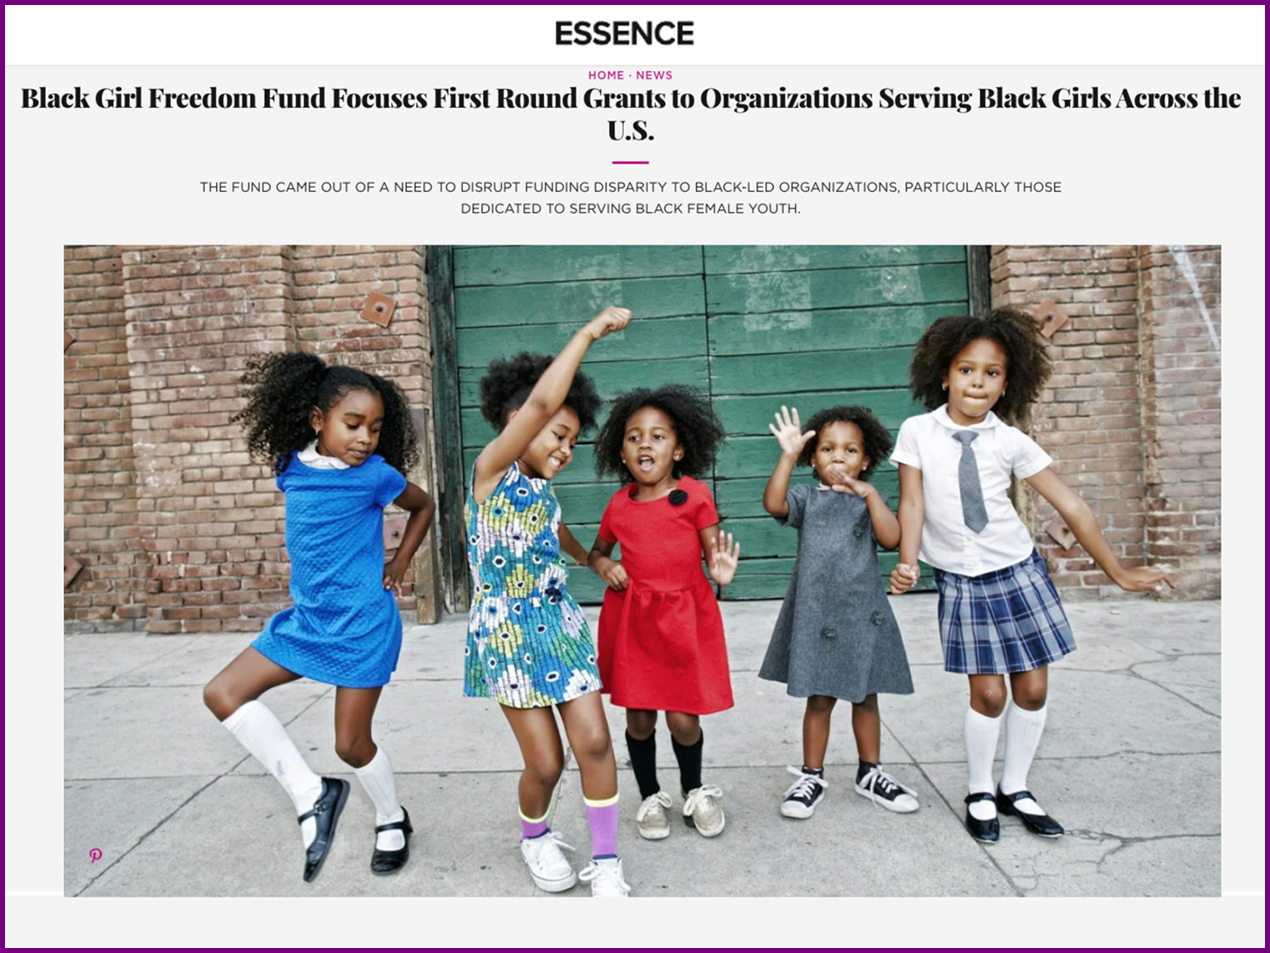 Essence feature: Black Girl Freedom Fund Focuses First Round Grants to Organizations Serving Black Girls Across the U.S.